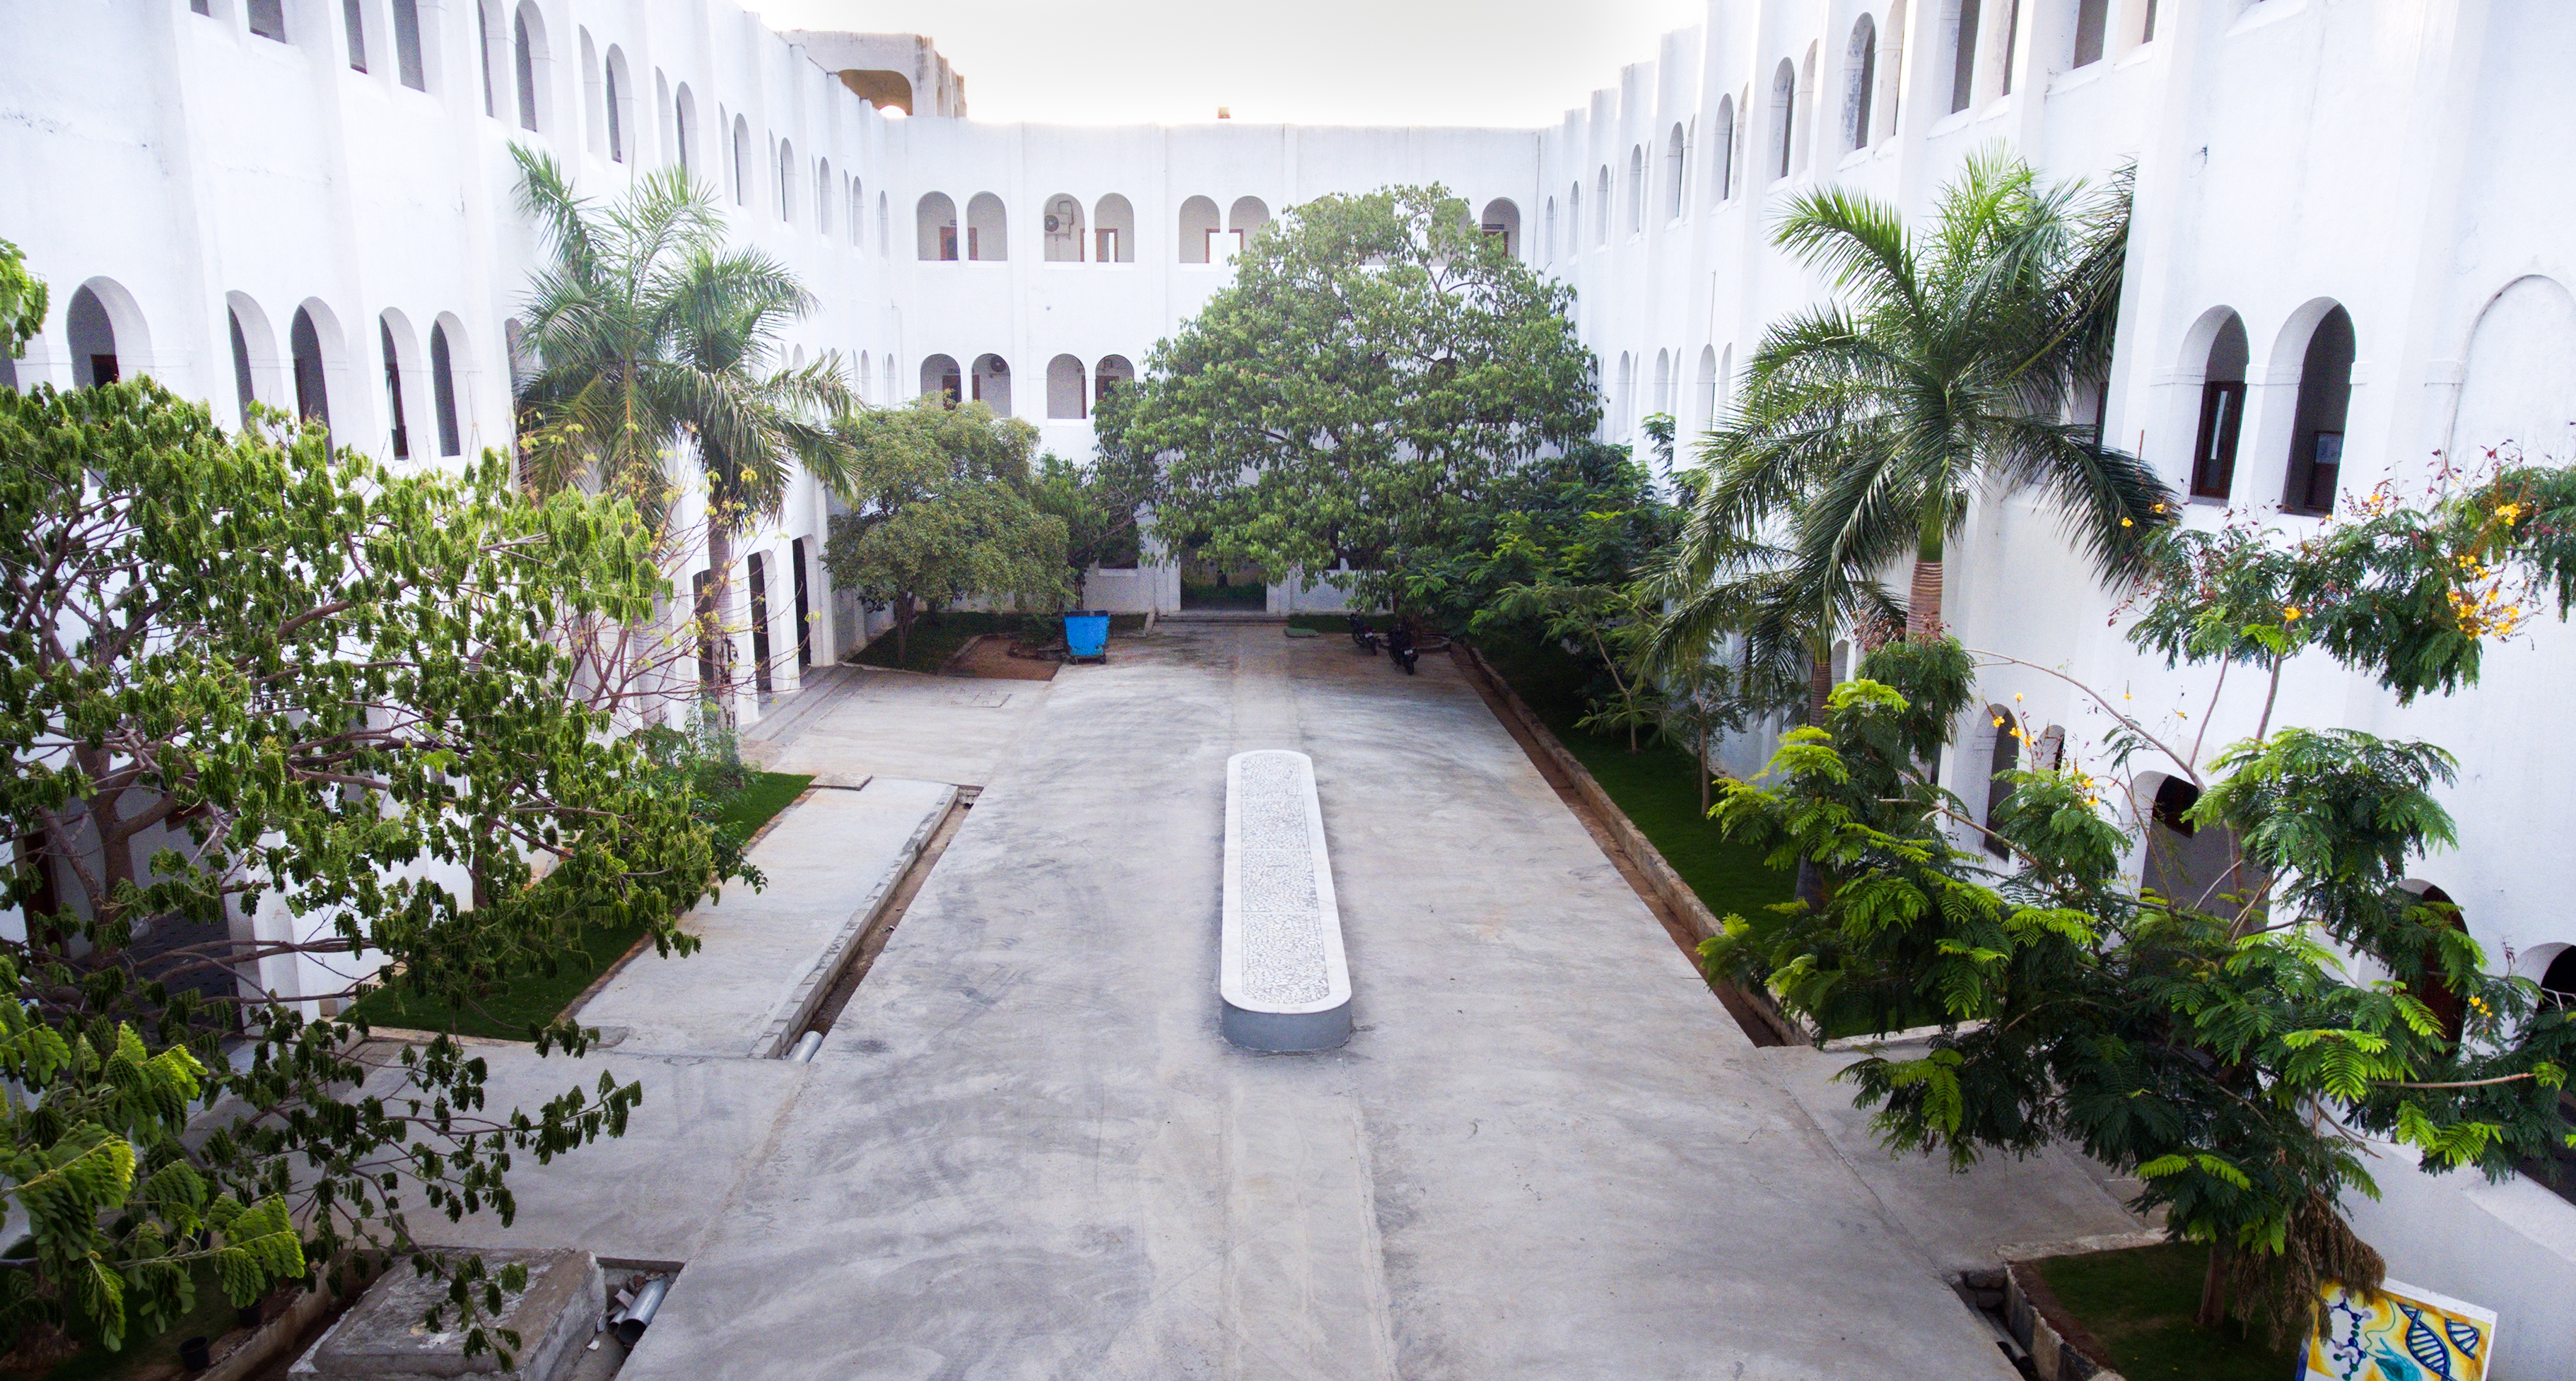 OUR CAMPUS Sathyabama Institute of Science and